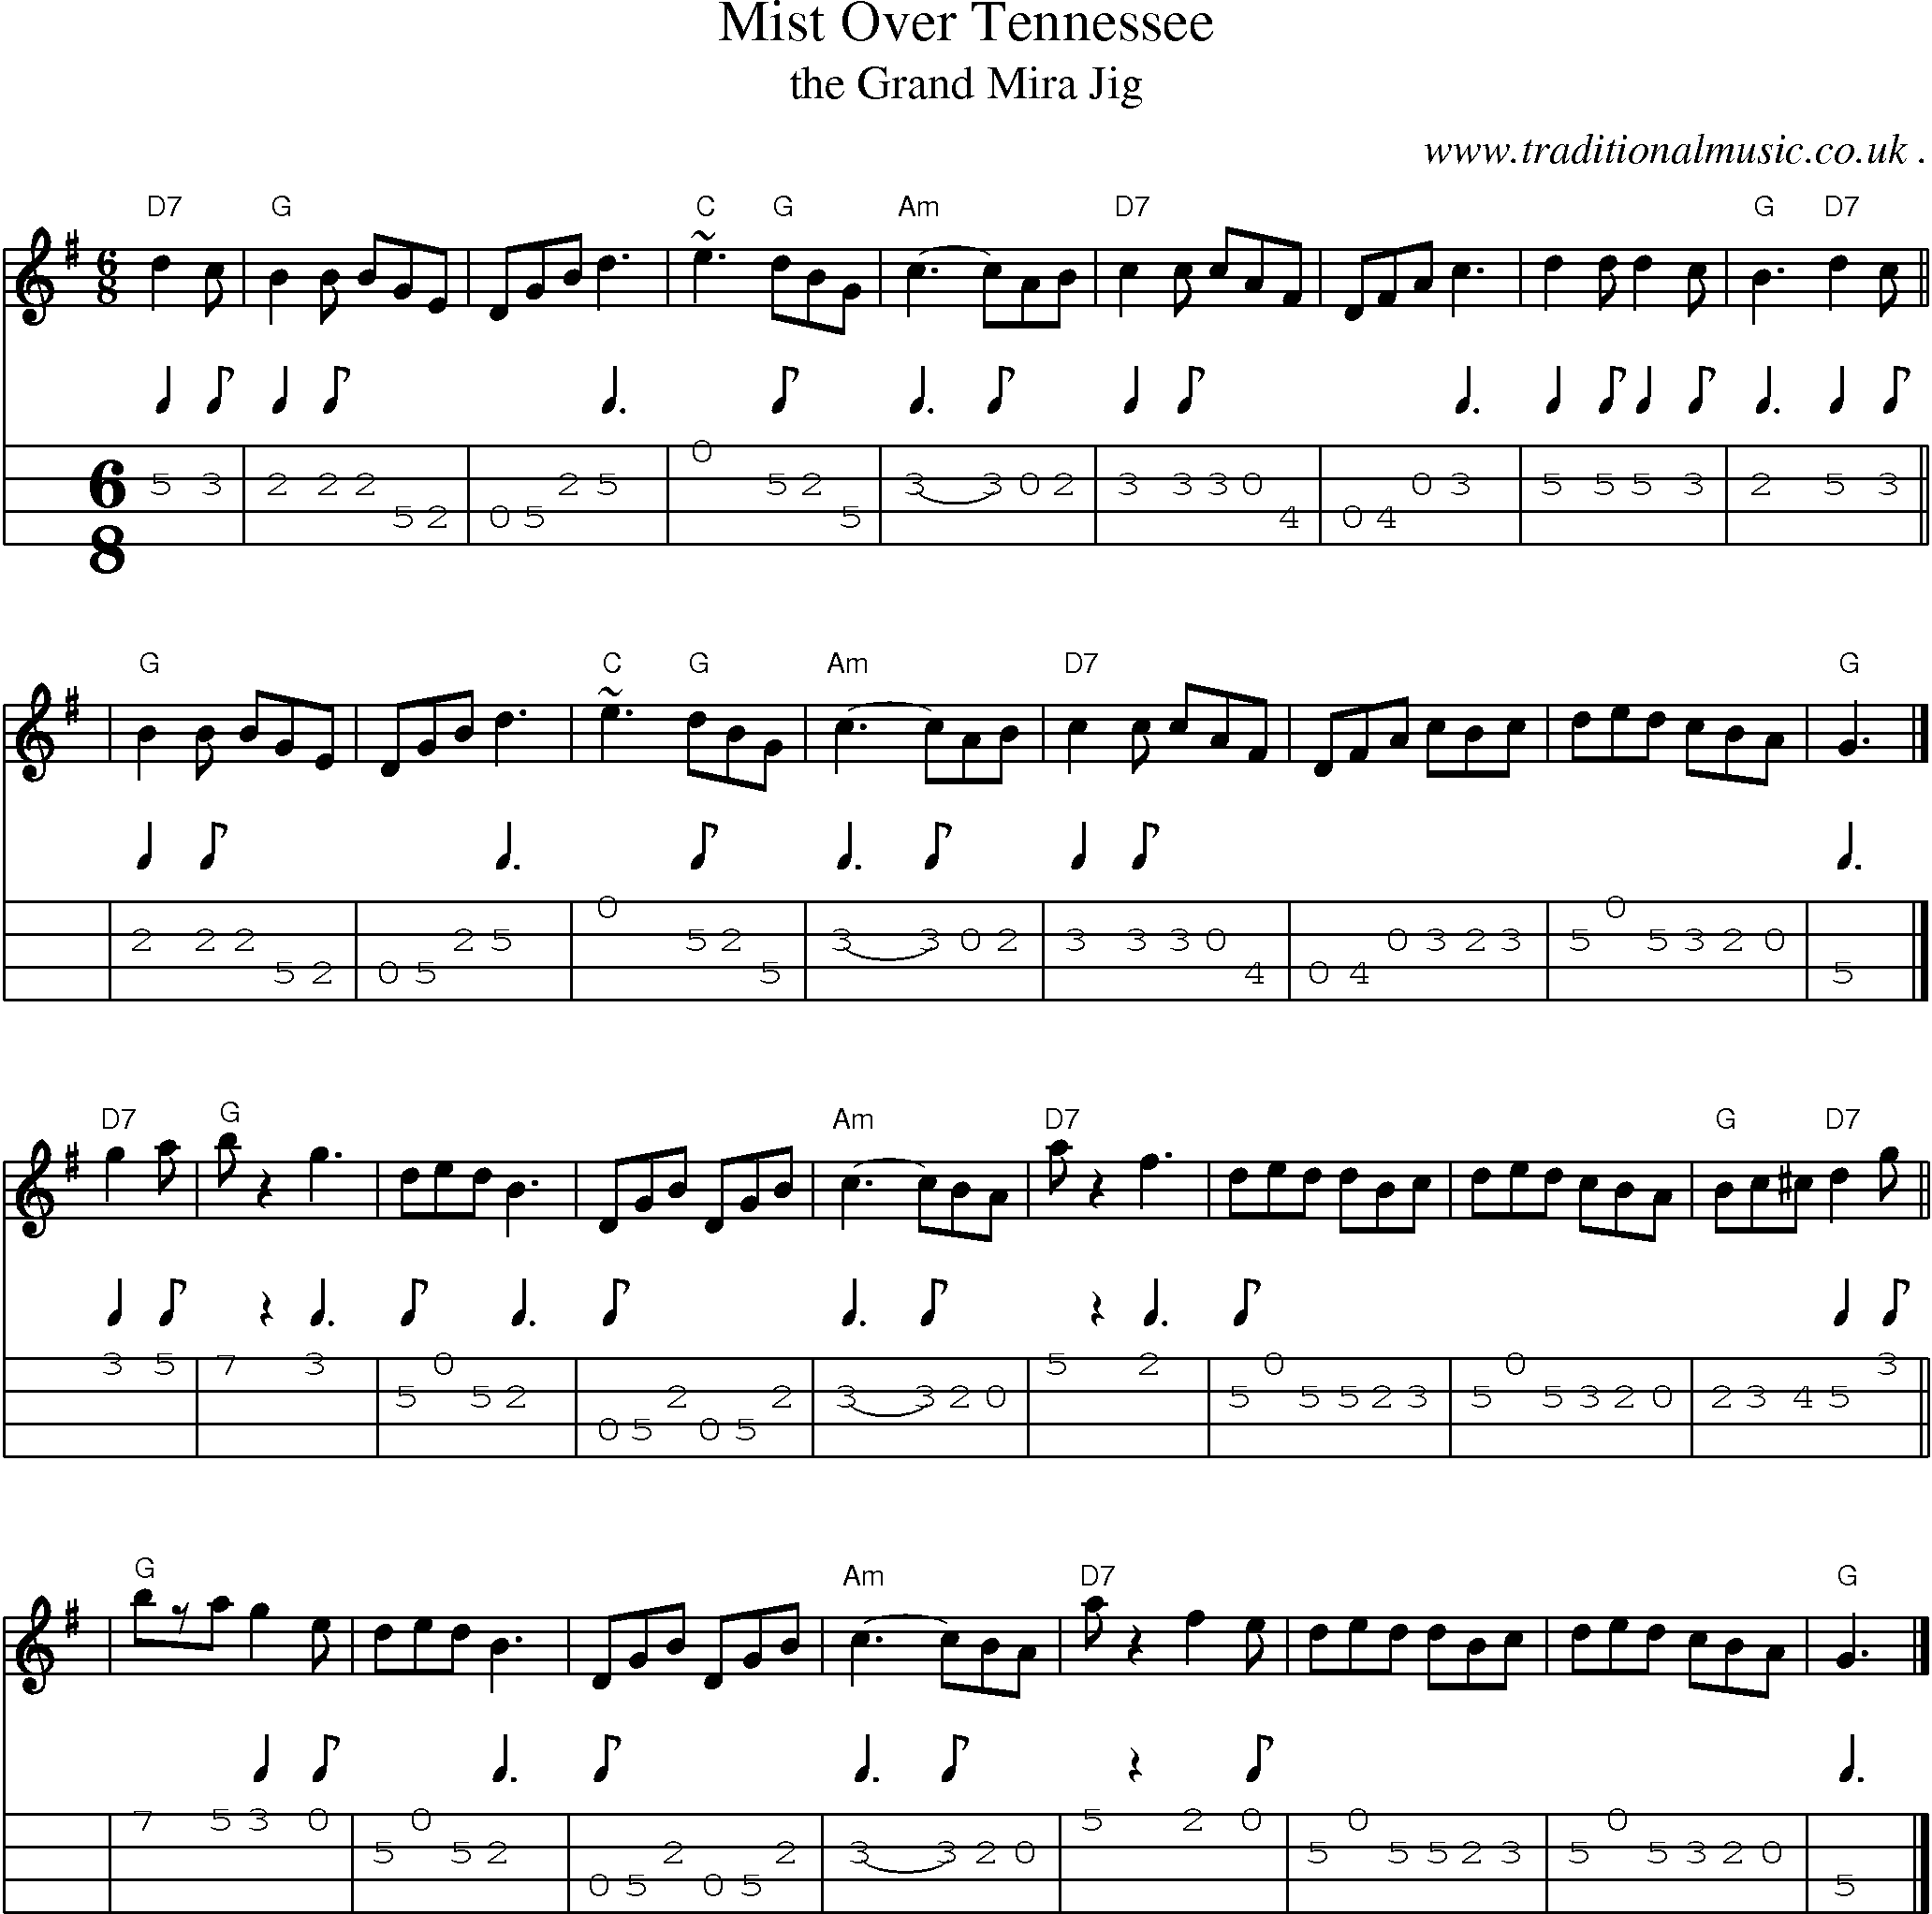 Sheet-music  score, Chords and Mandolin Tabs for Mist Over Tennessee